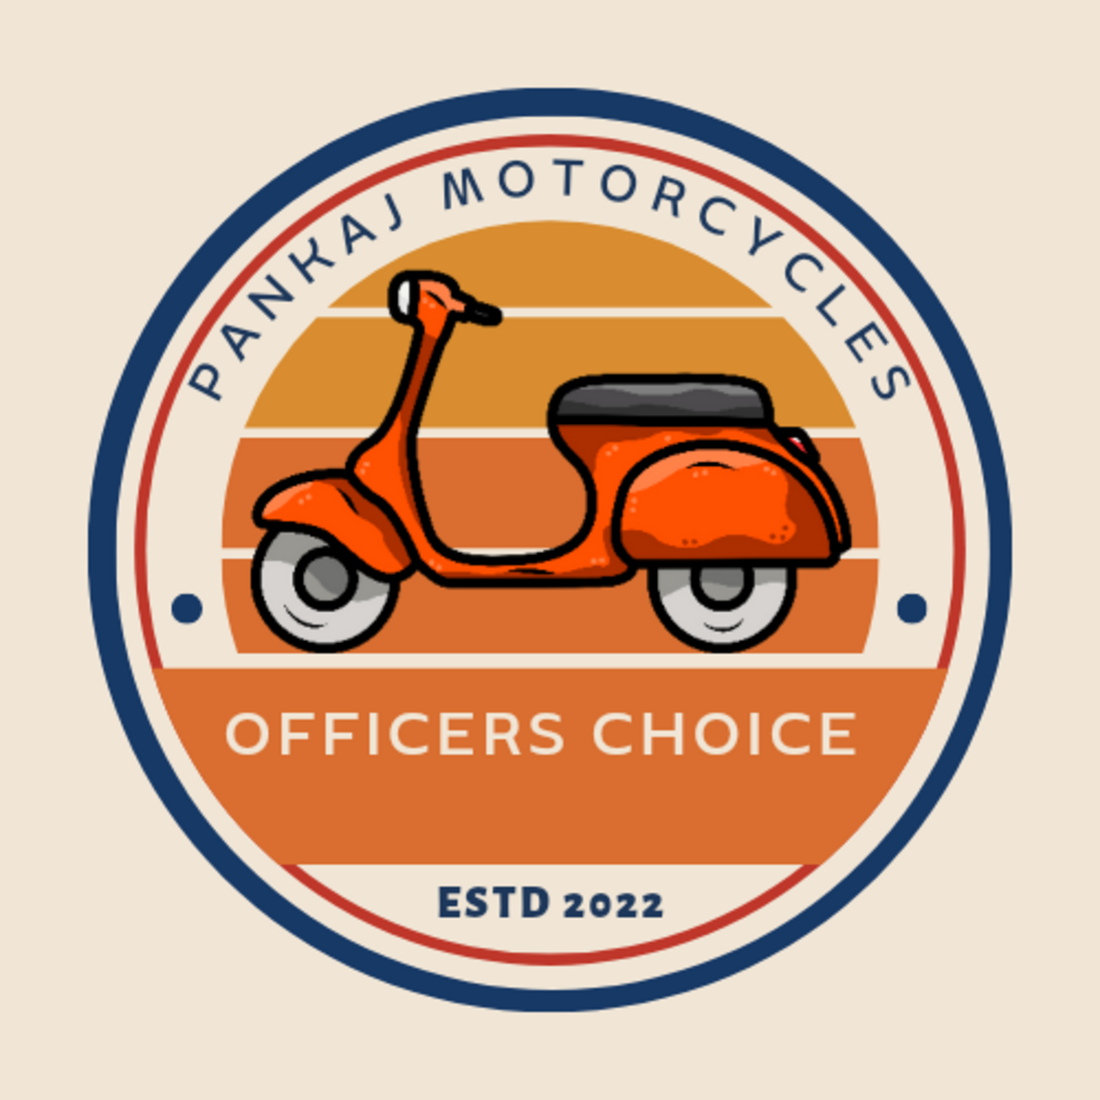 Motorcycle Logo Design cover image.